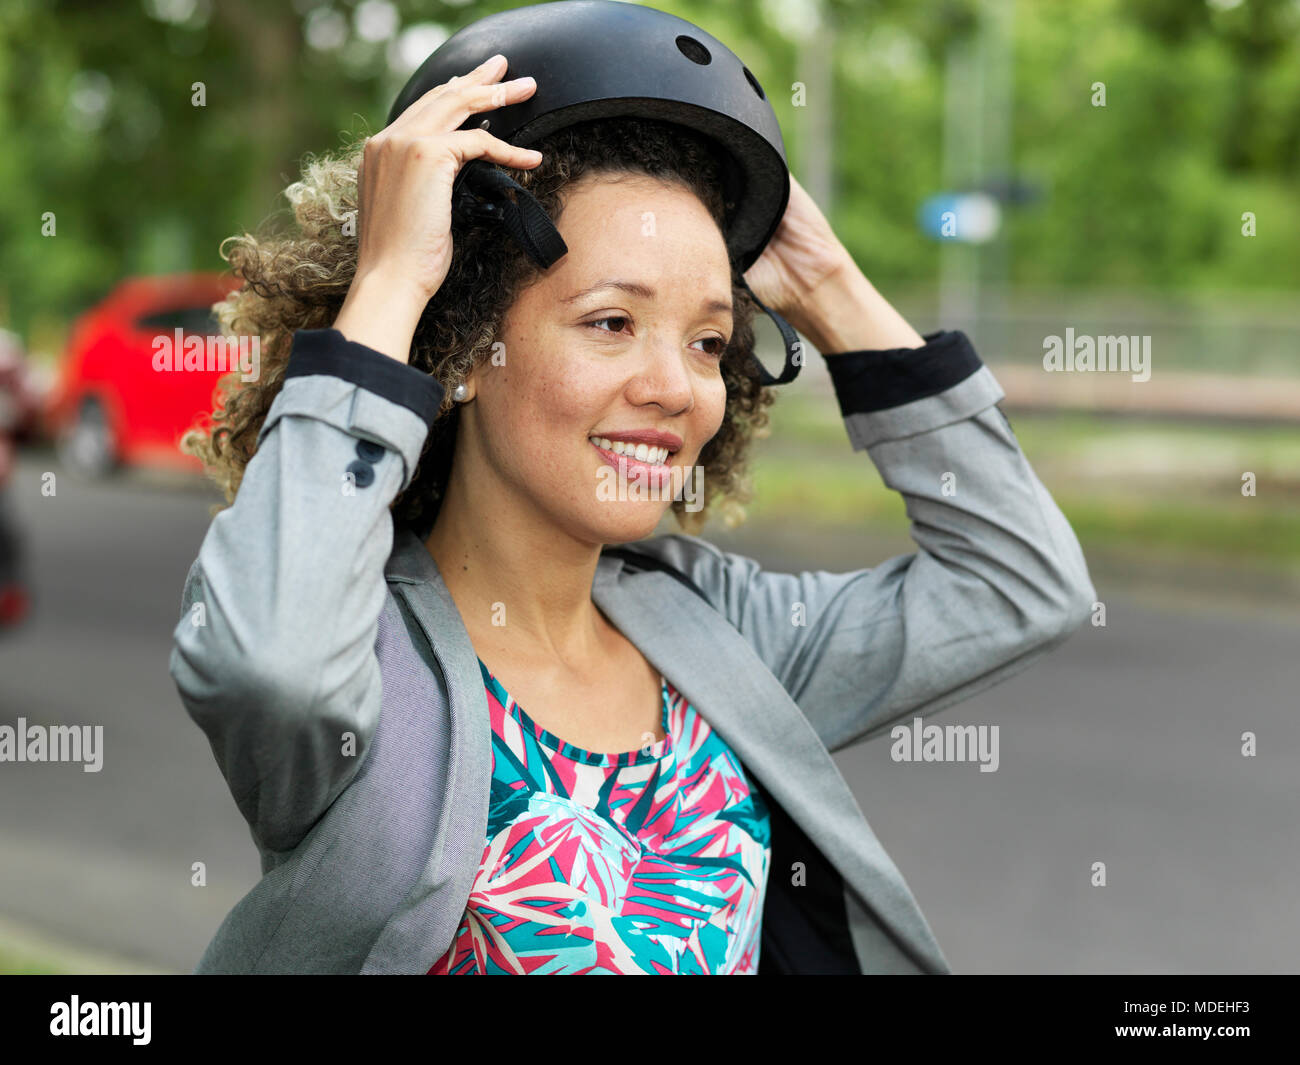 Mid adult woman putting on bicycle safety helmet Stock Photo